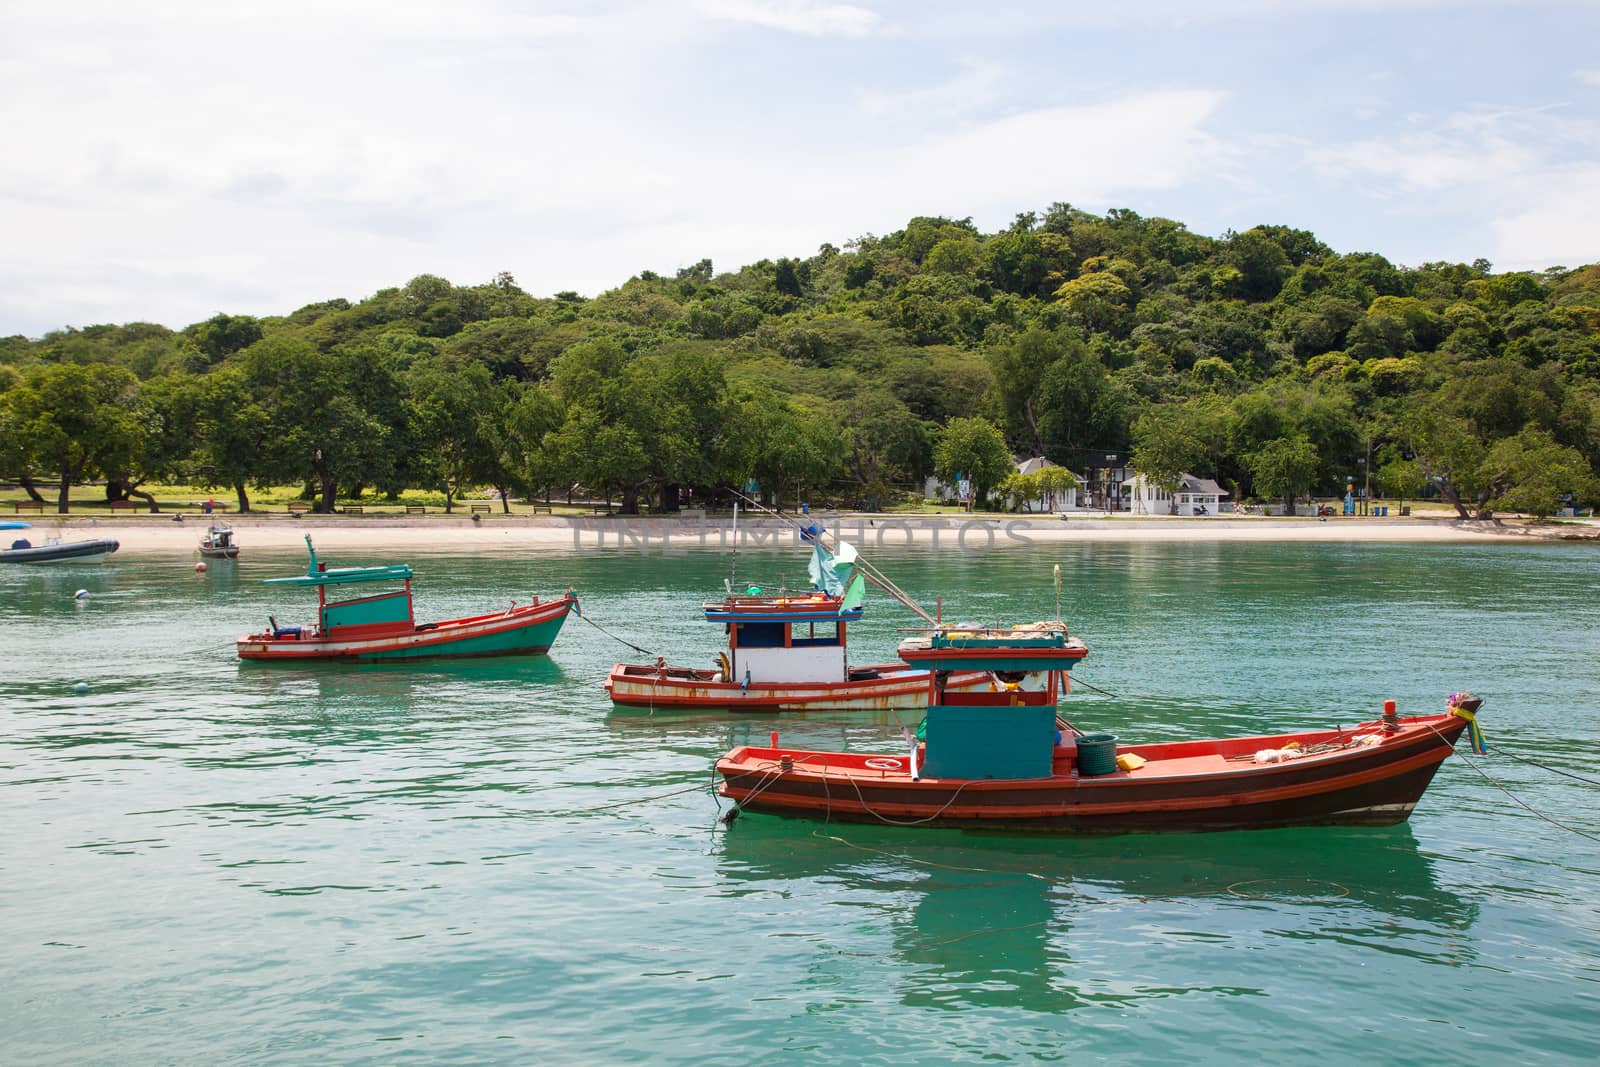 Small fishing boats Parking in the sea near the island dock.